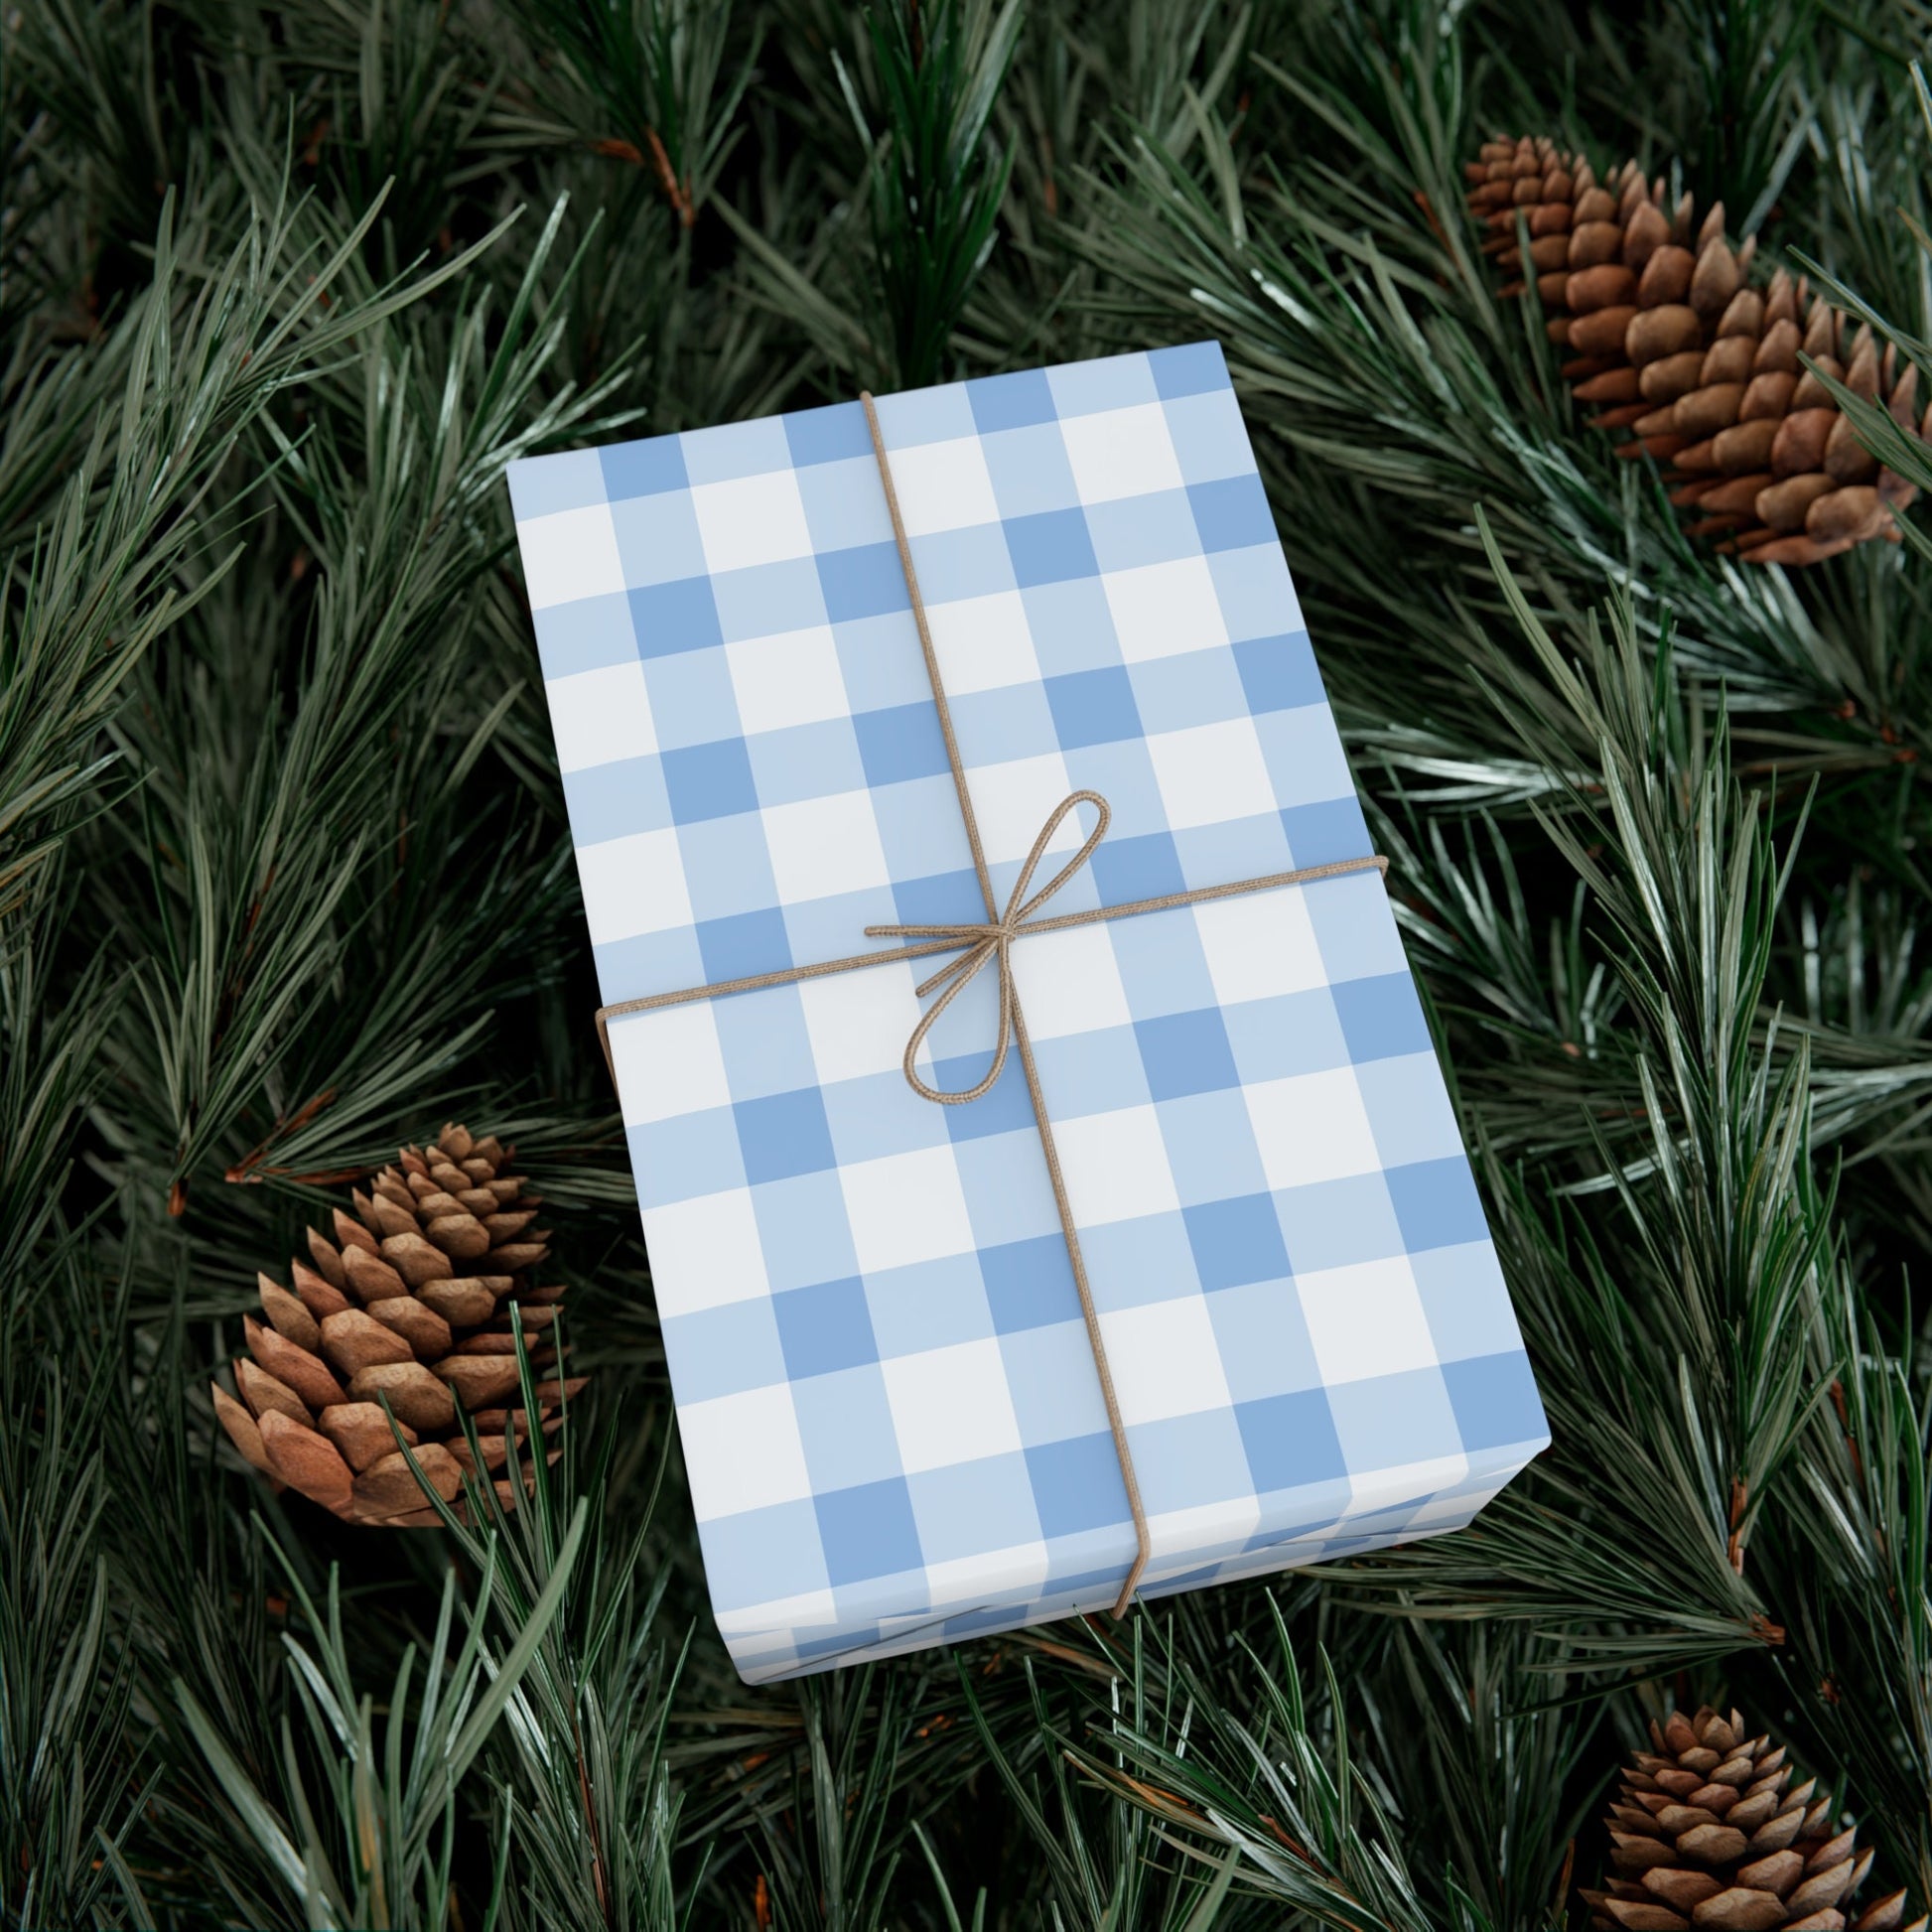 Blue Gingham Wrapping Paper, Cute Checker Plaid Birthday Gift Wrap Paper, Baby Shower, Wedding Present Paper Roll for Her